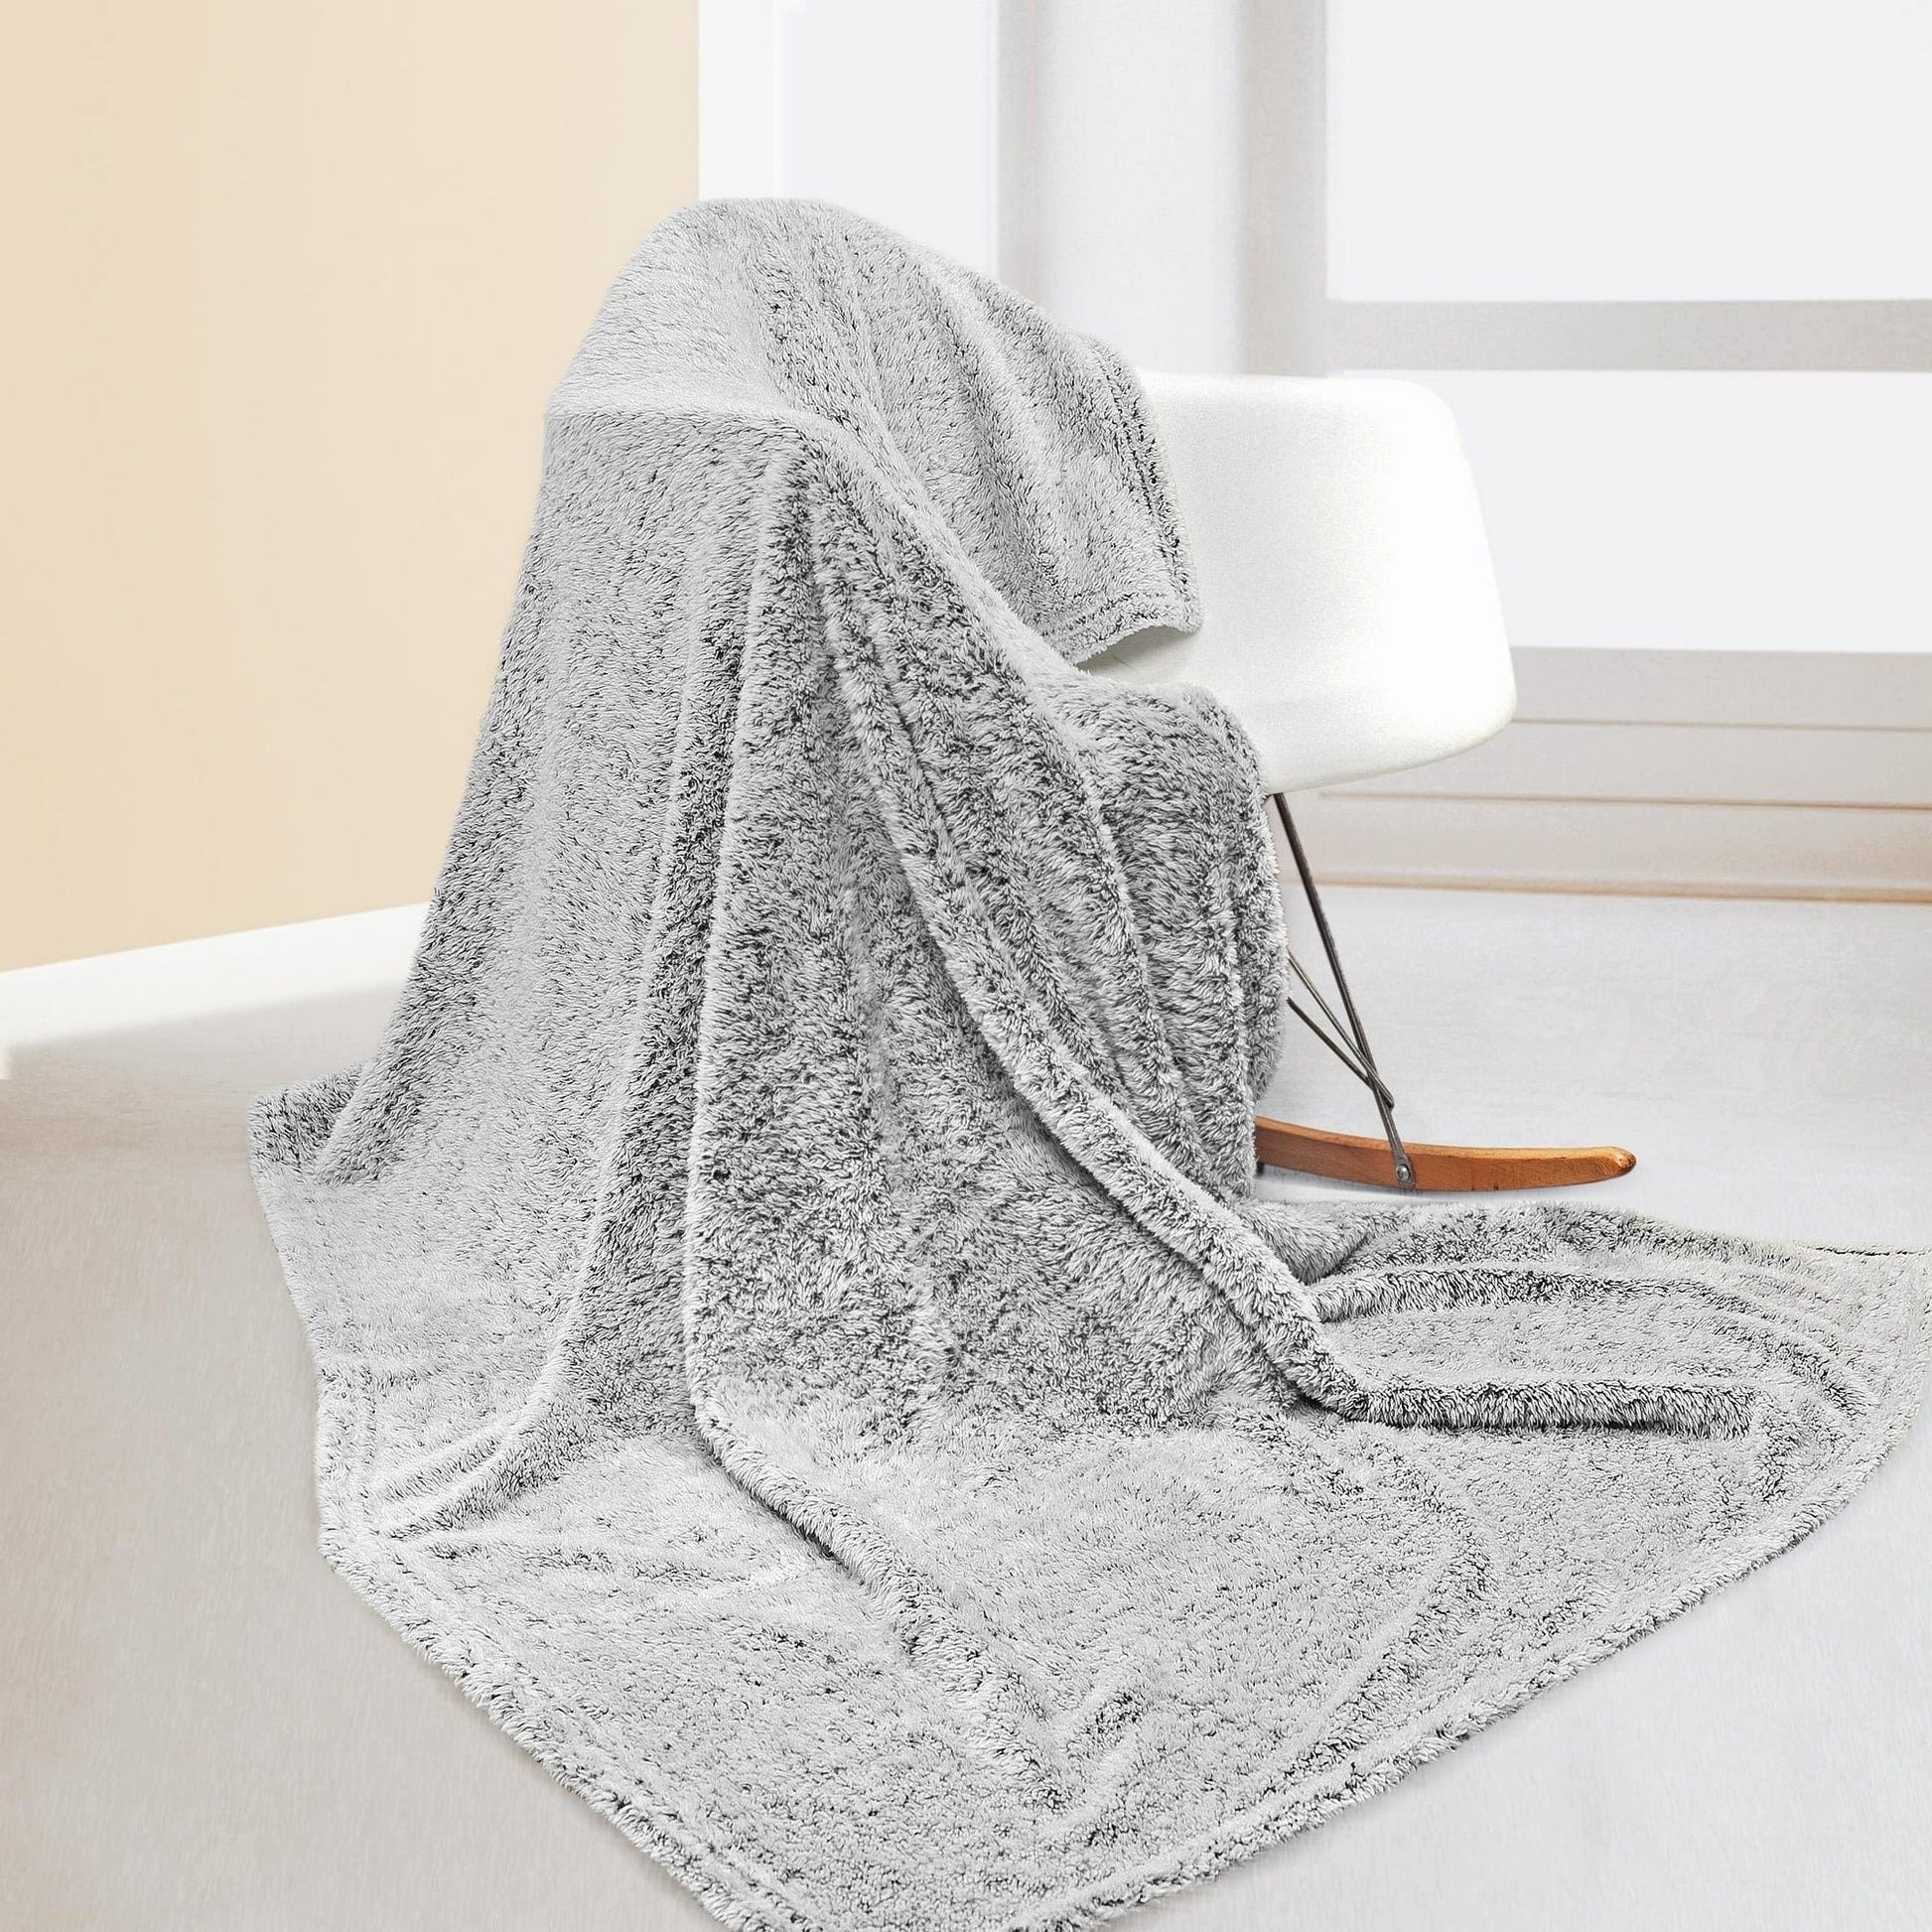 Throw blanket for cozy nights